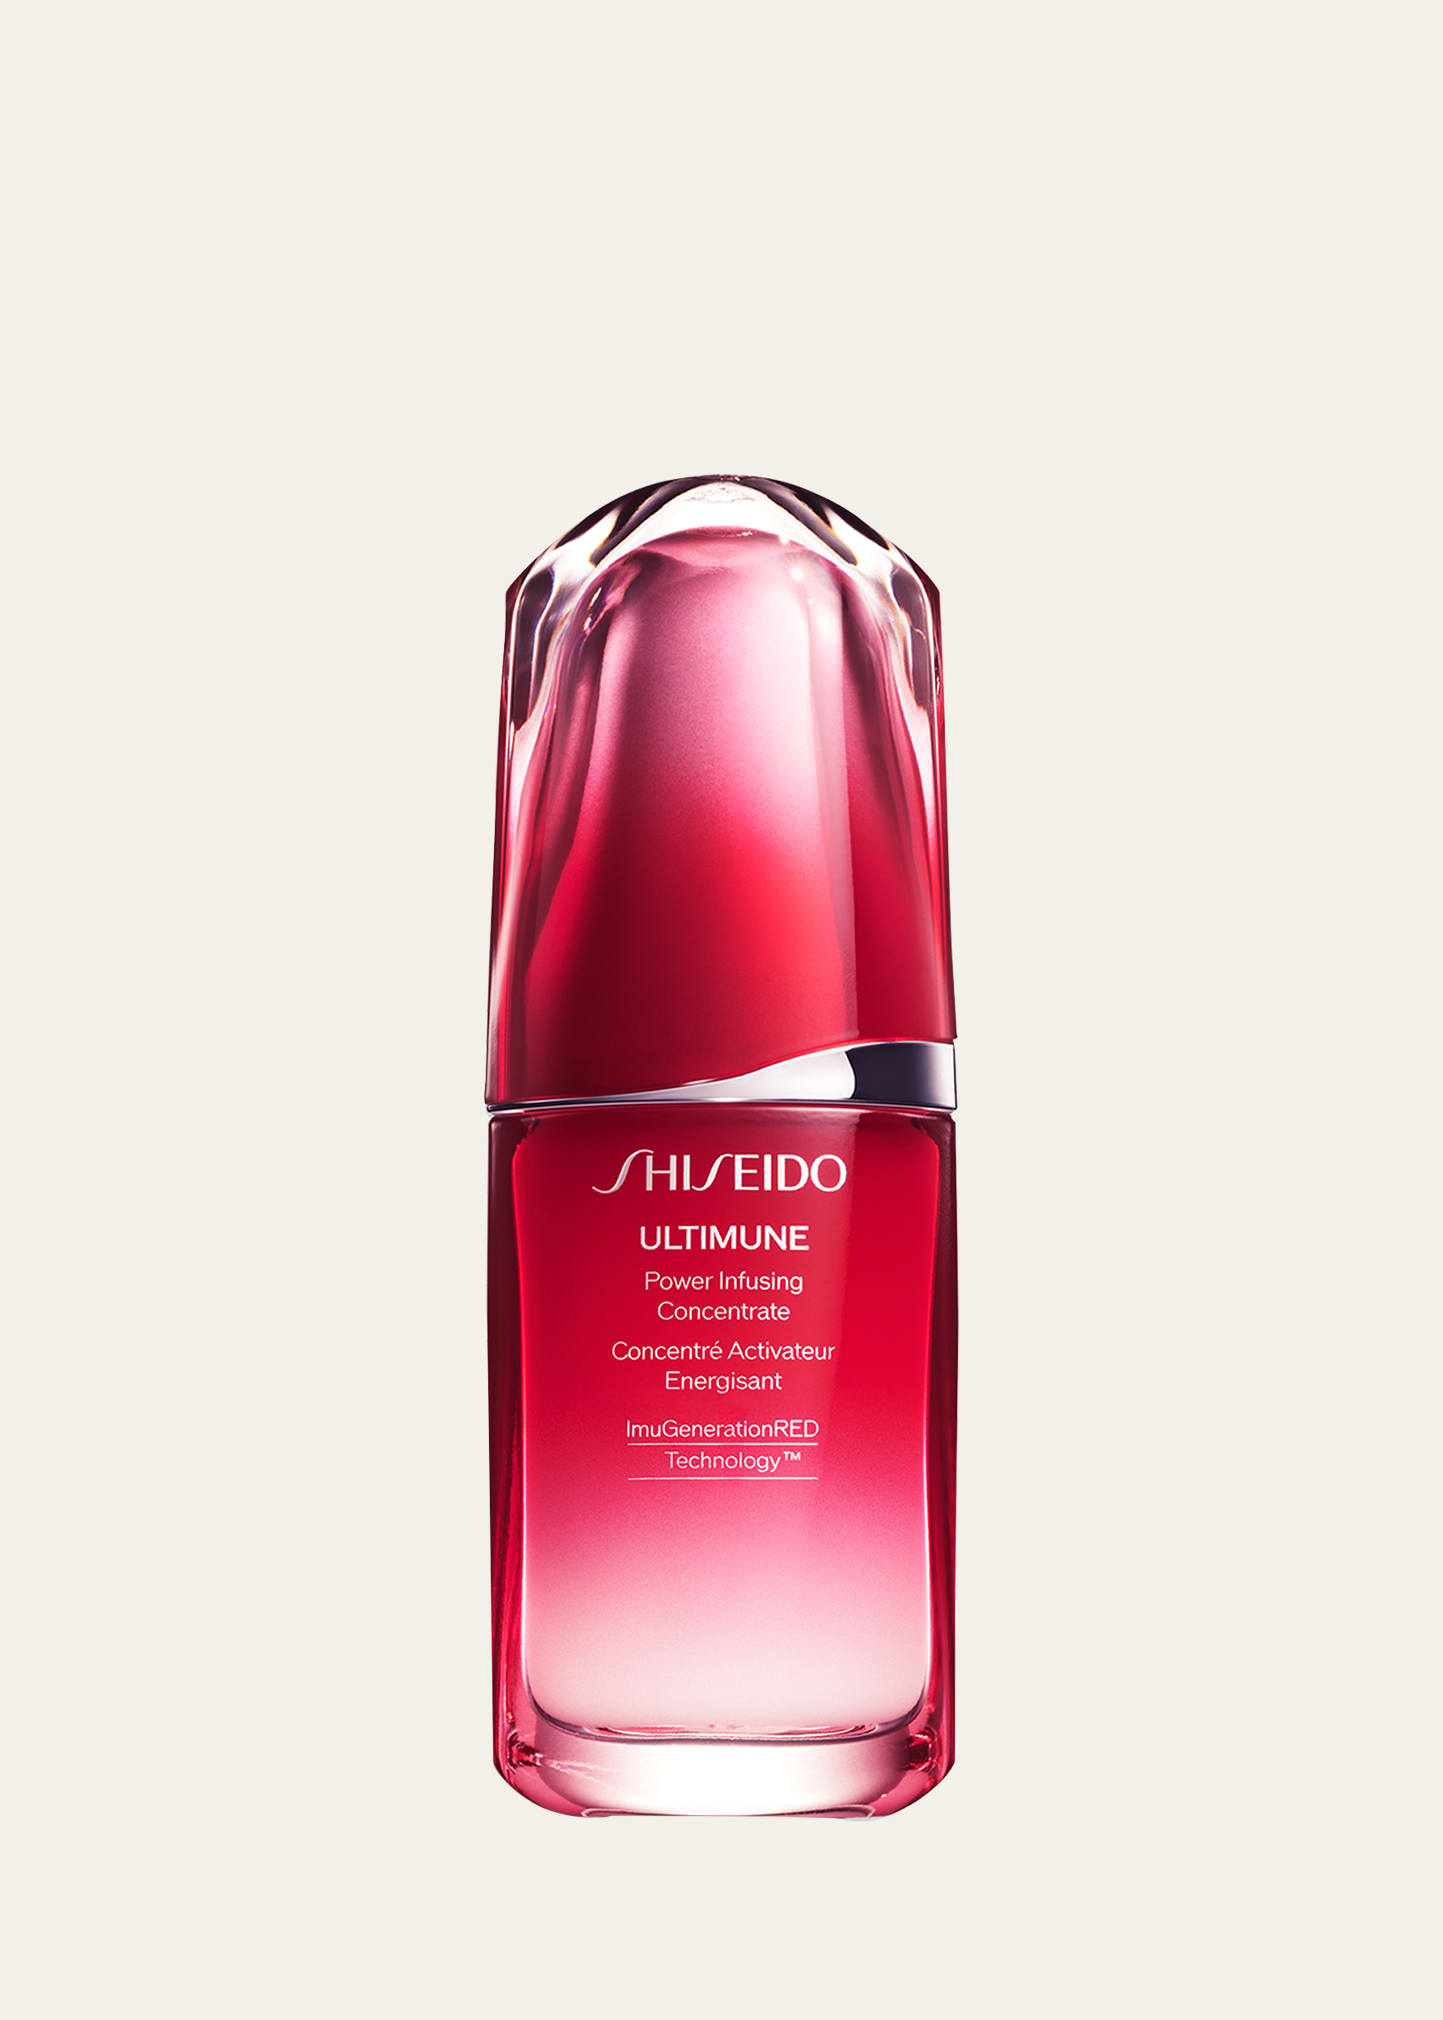 Ultimune Power Infusing Concentrate, 1.6 oz.